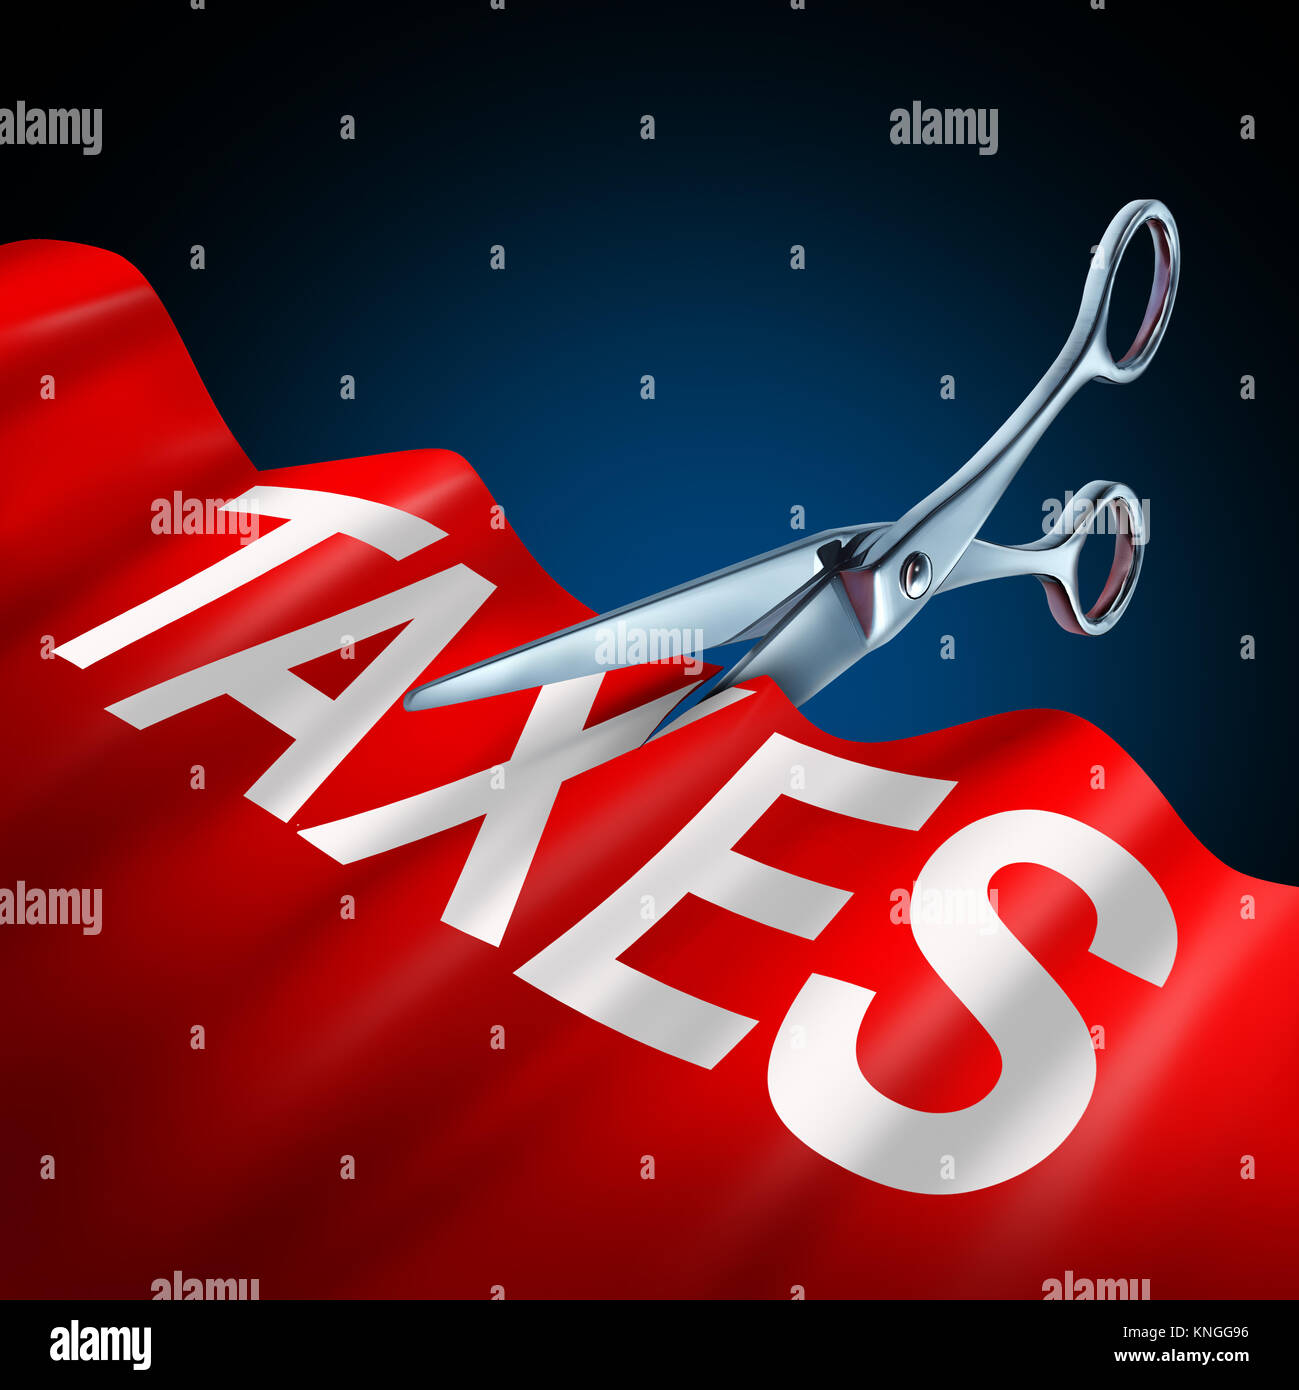 Tax cuts and cut taxes economic and finance concept as a new government bill or legislation law to lower income taxation as a 3D illustration. Stock Photo